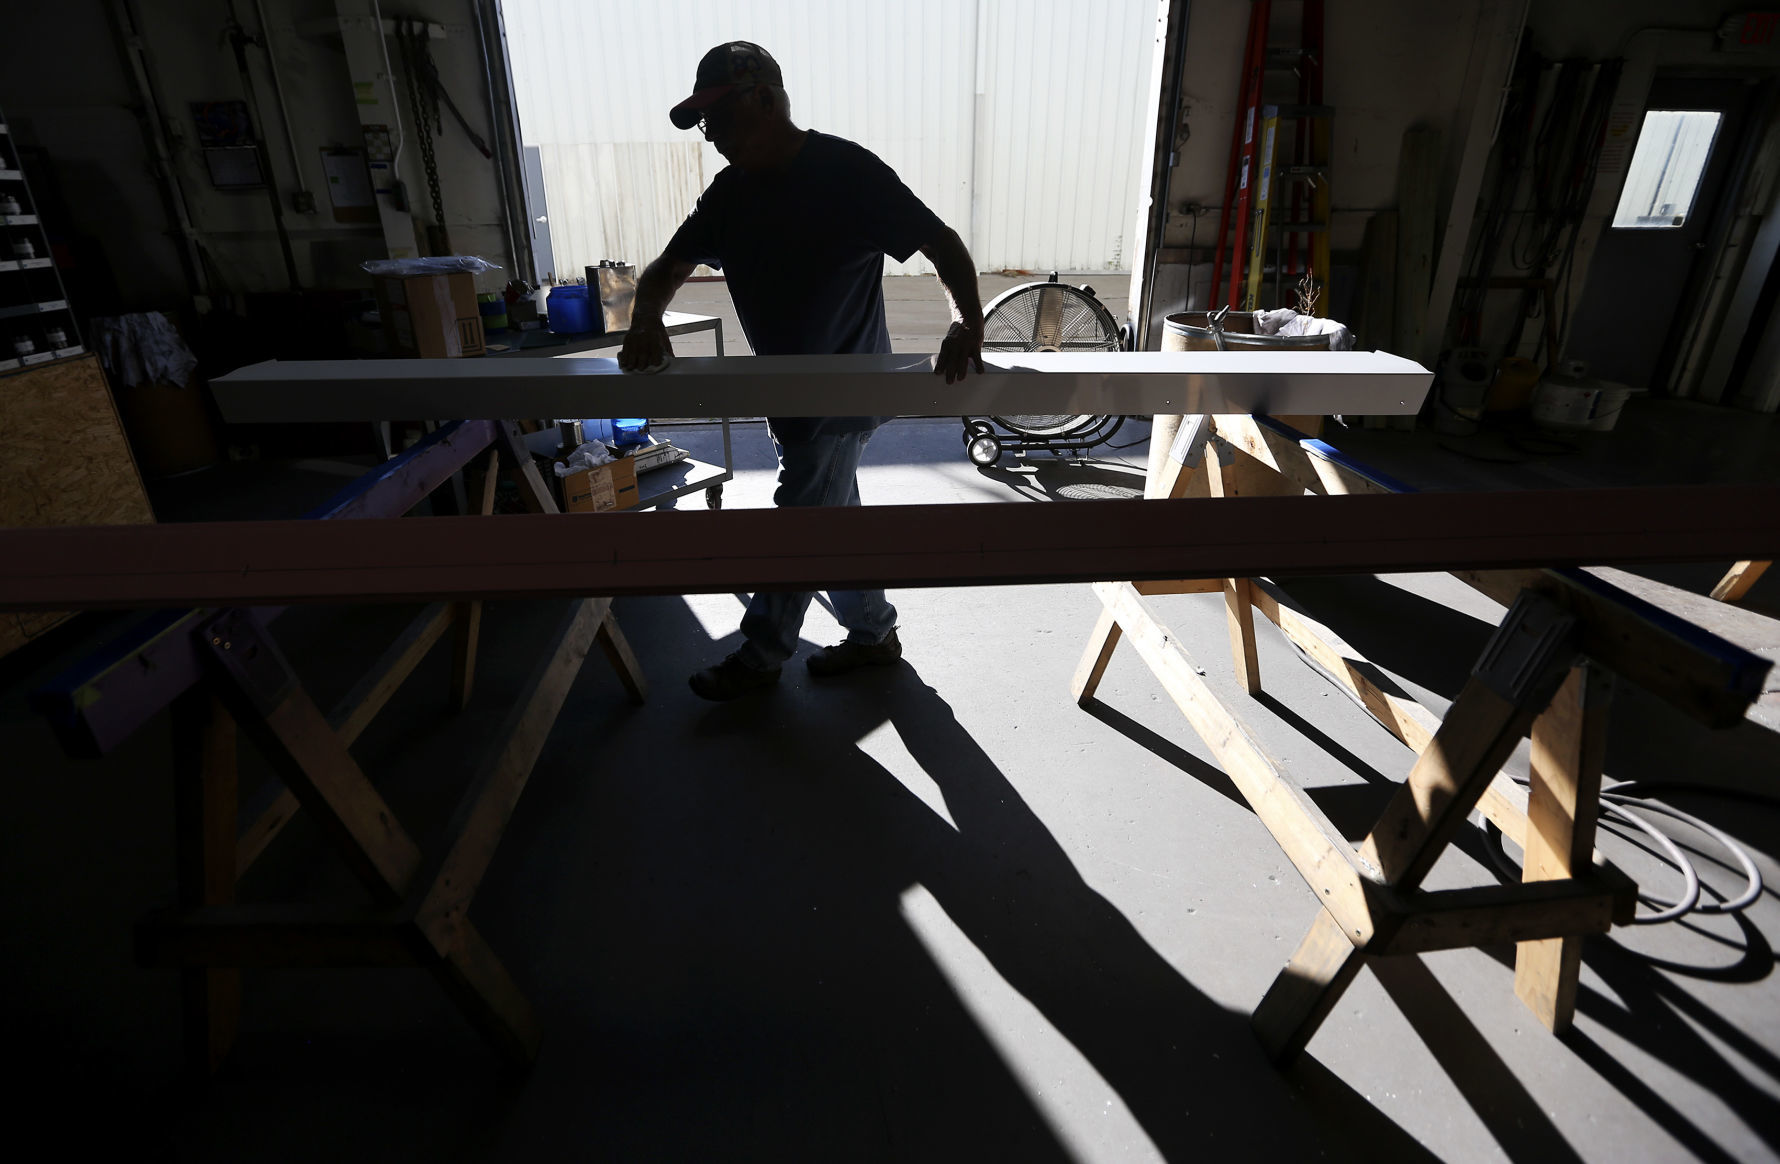 Bill Weitz works at Weitz Sign Company in Dubuque.    PHOTO CREDIT: NICKI KOHL